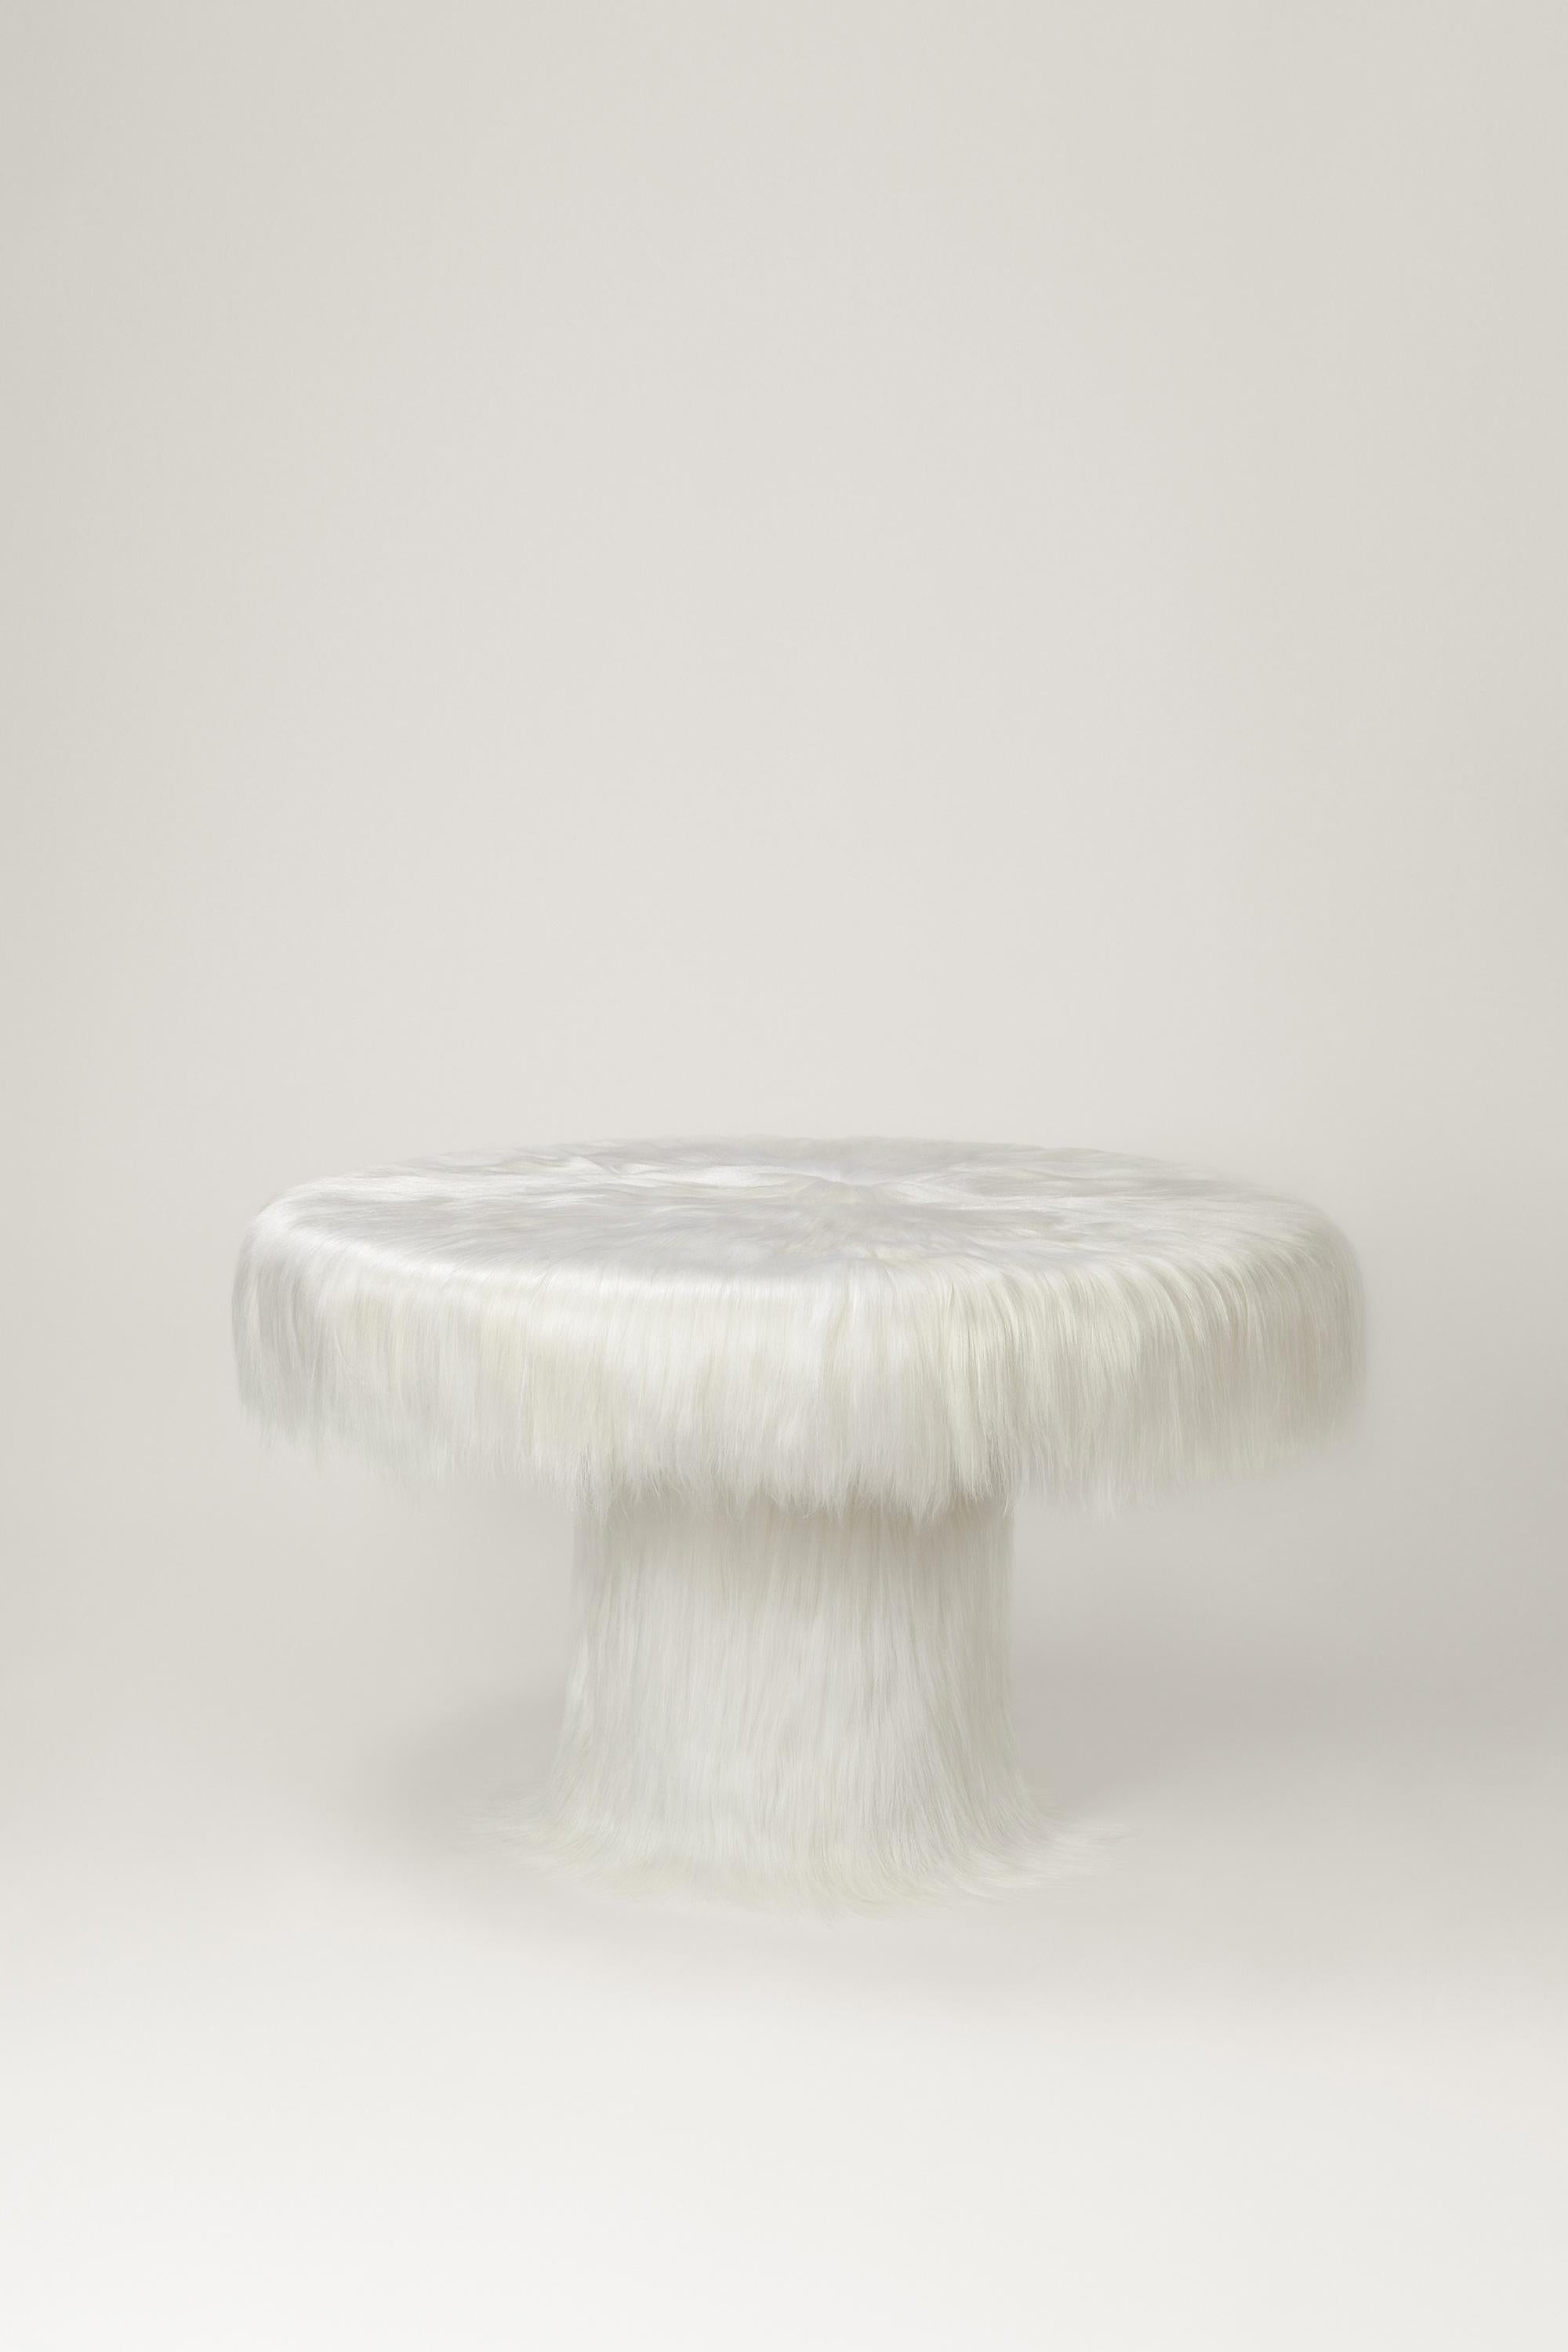 Raw Table by Atelier V&F
Limited Edition Of 5+2AP Pieces.
Dimensions: Ø 130 x H 76 cm.
Materials: Goatskin offcuts

Inspired by the earth goddess Gaia,「Revelation of Gaia」aims to explore the mighty but soft inner power and to praise the mysterious